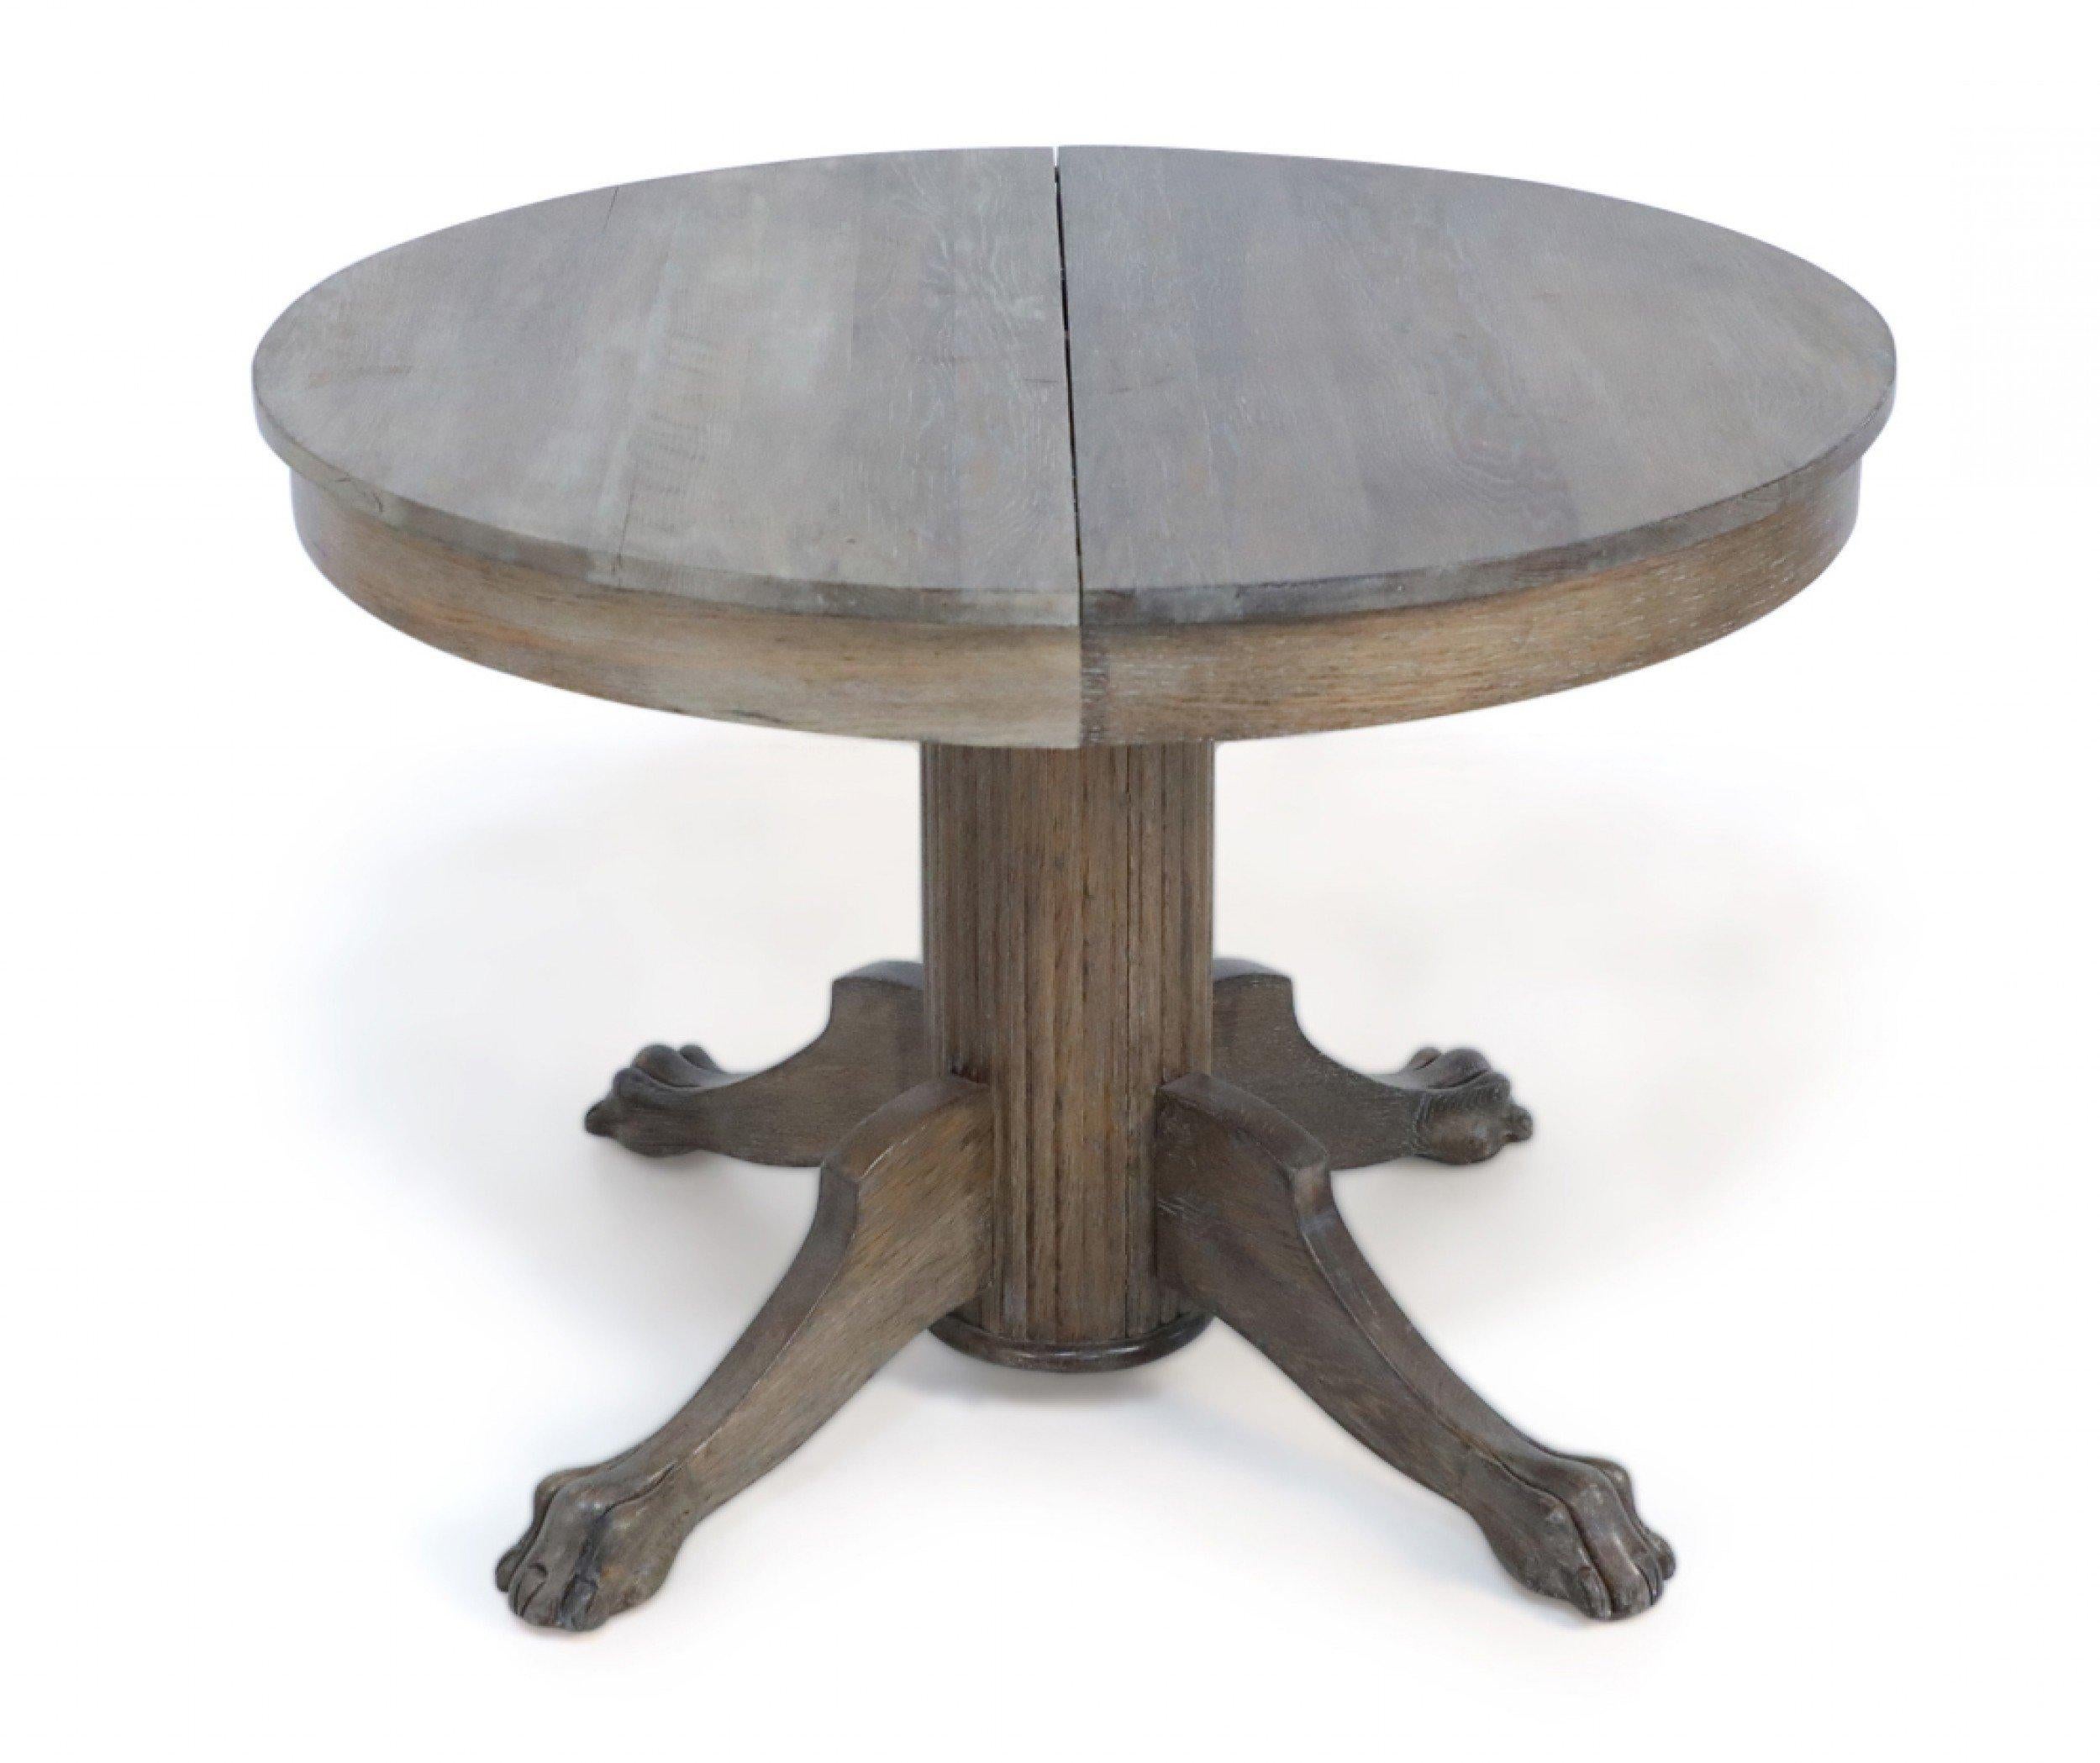 English Edwardian Cerused Oak Circular Claw Foot Center/Dining Table with Leaves For Sale 4